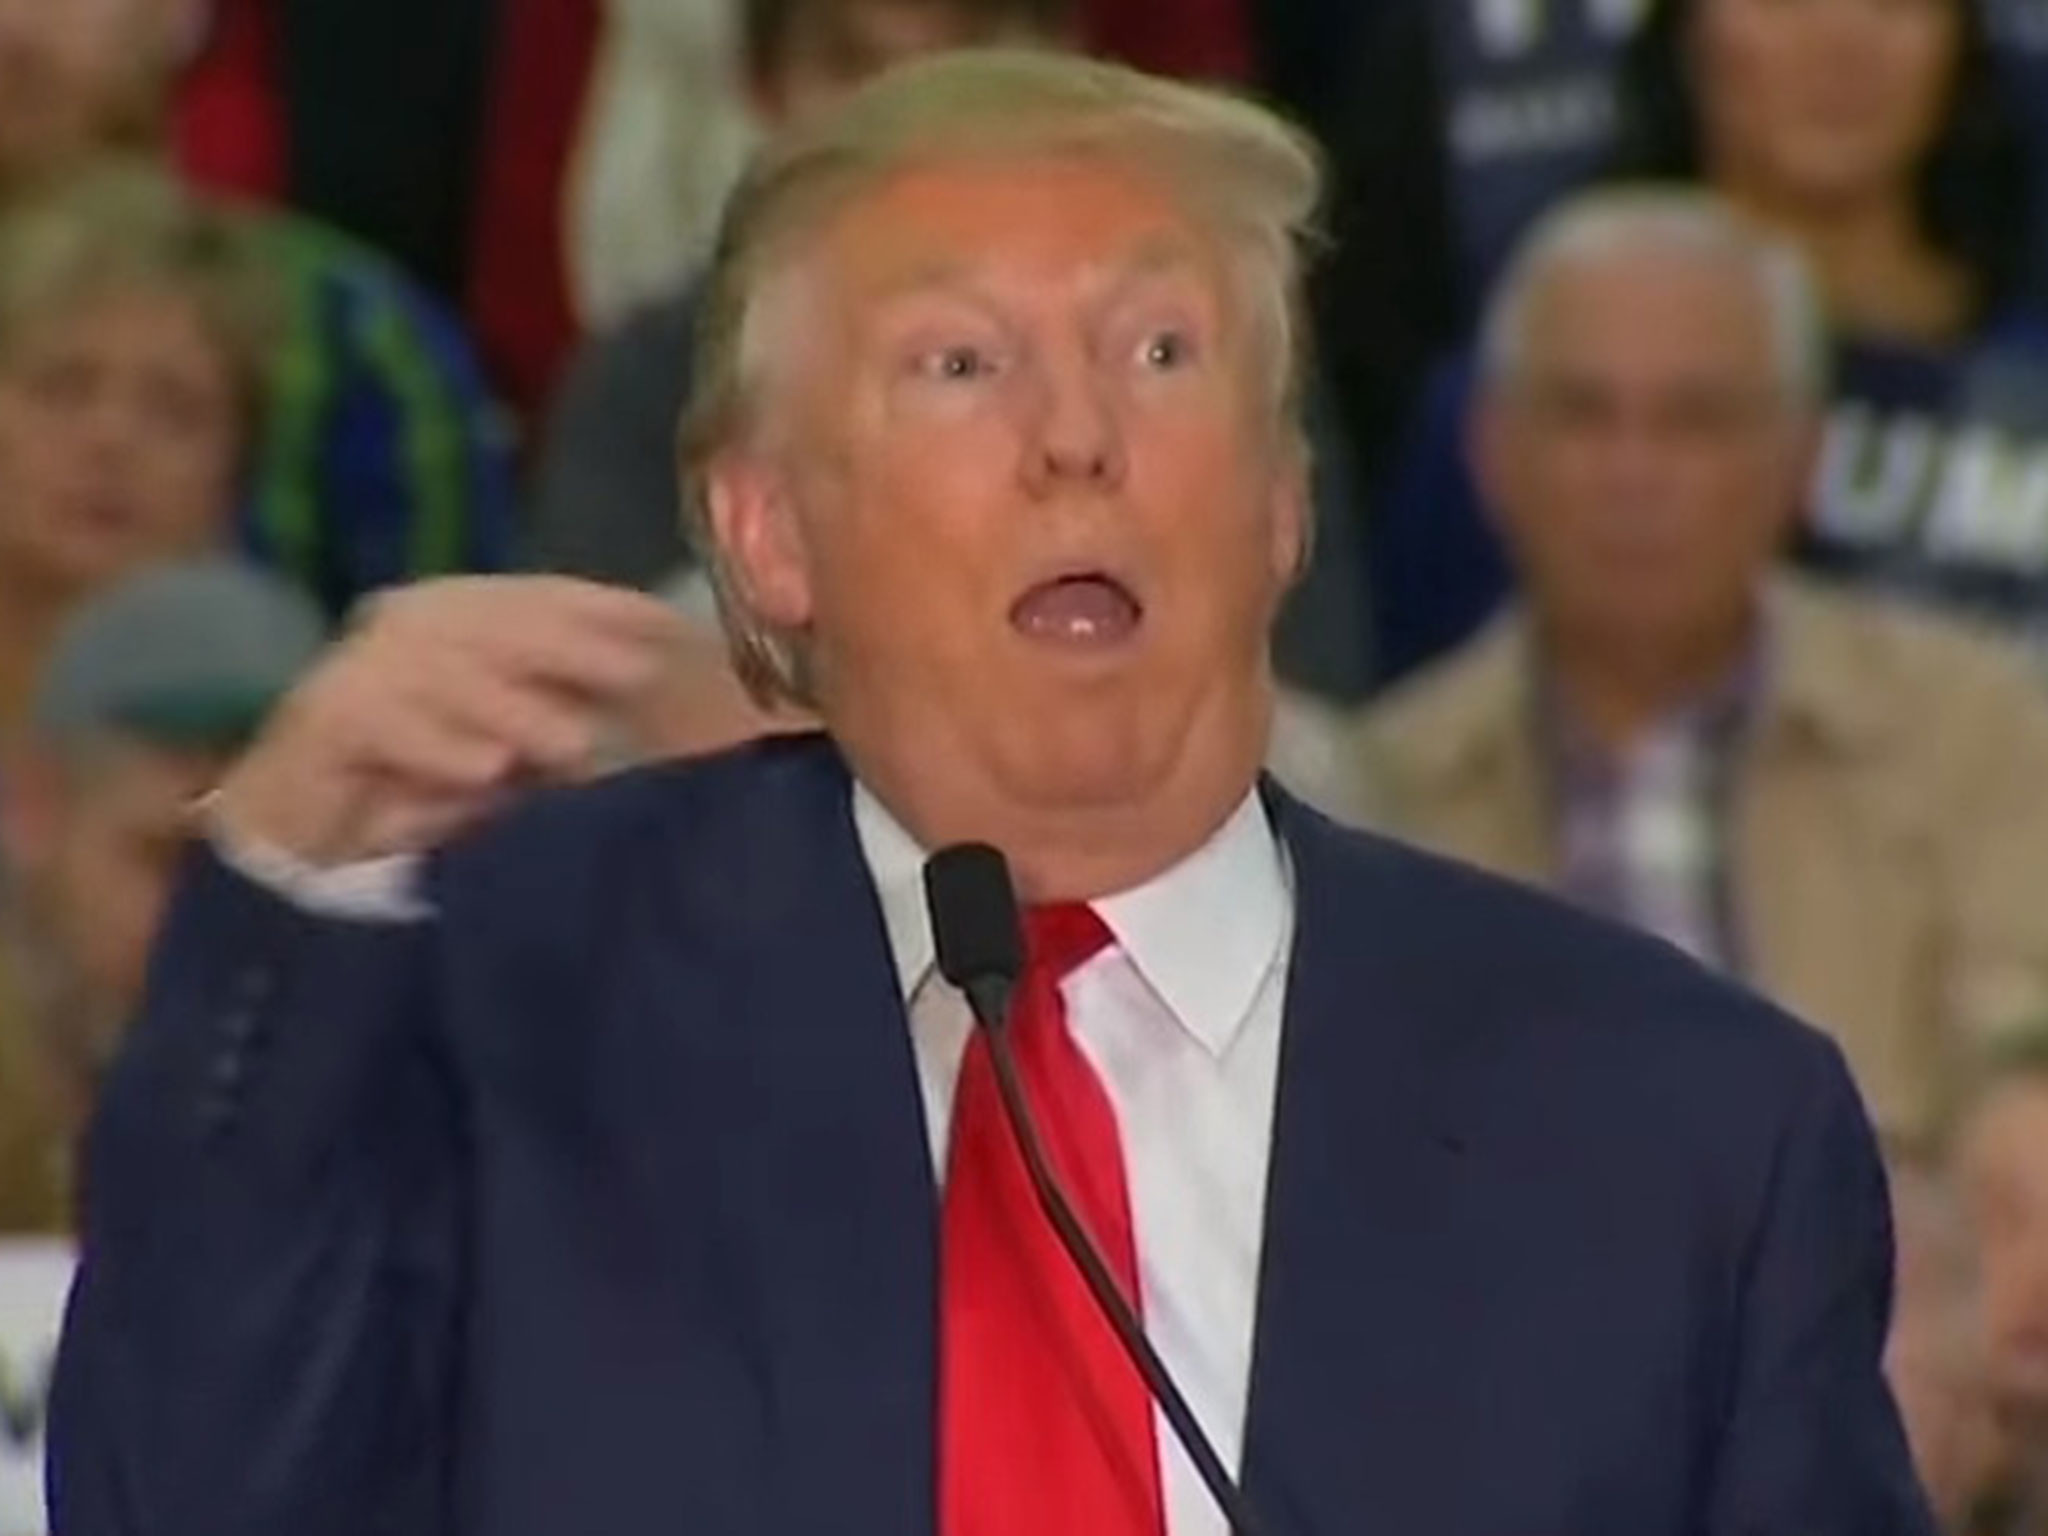 Donald Trump criticised for mocking journalist's disability during campaign  speech | The Independent